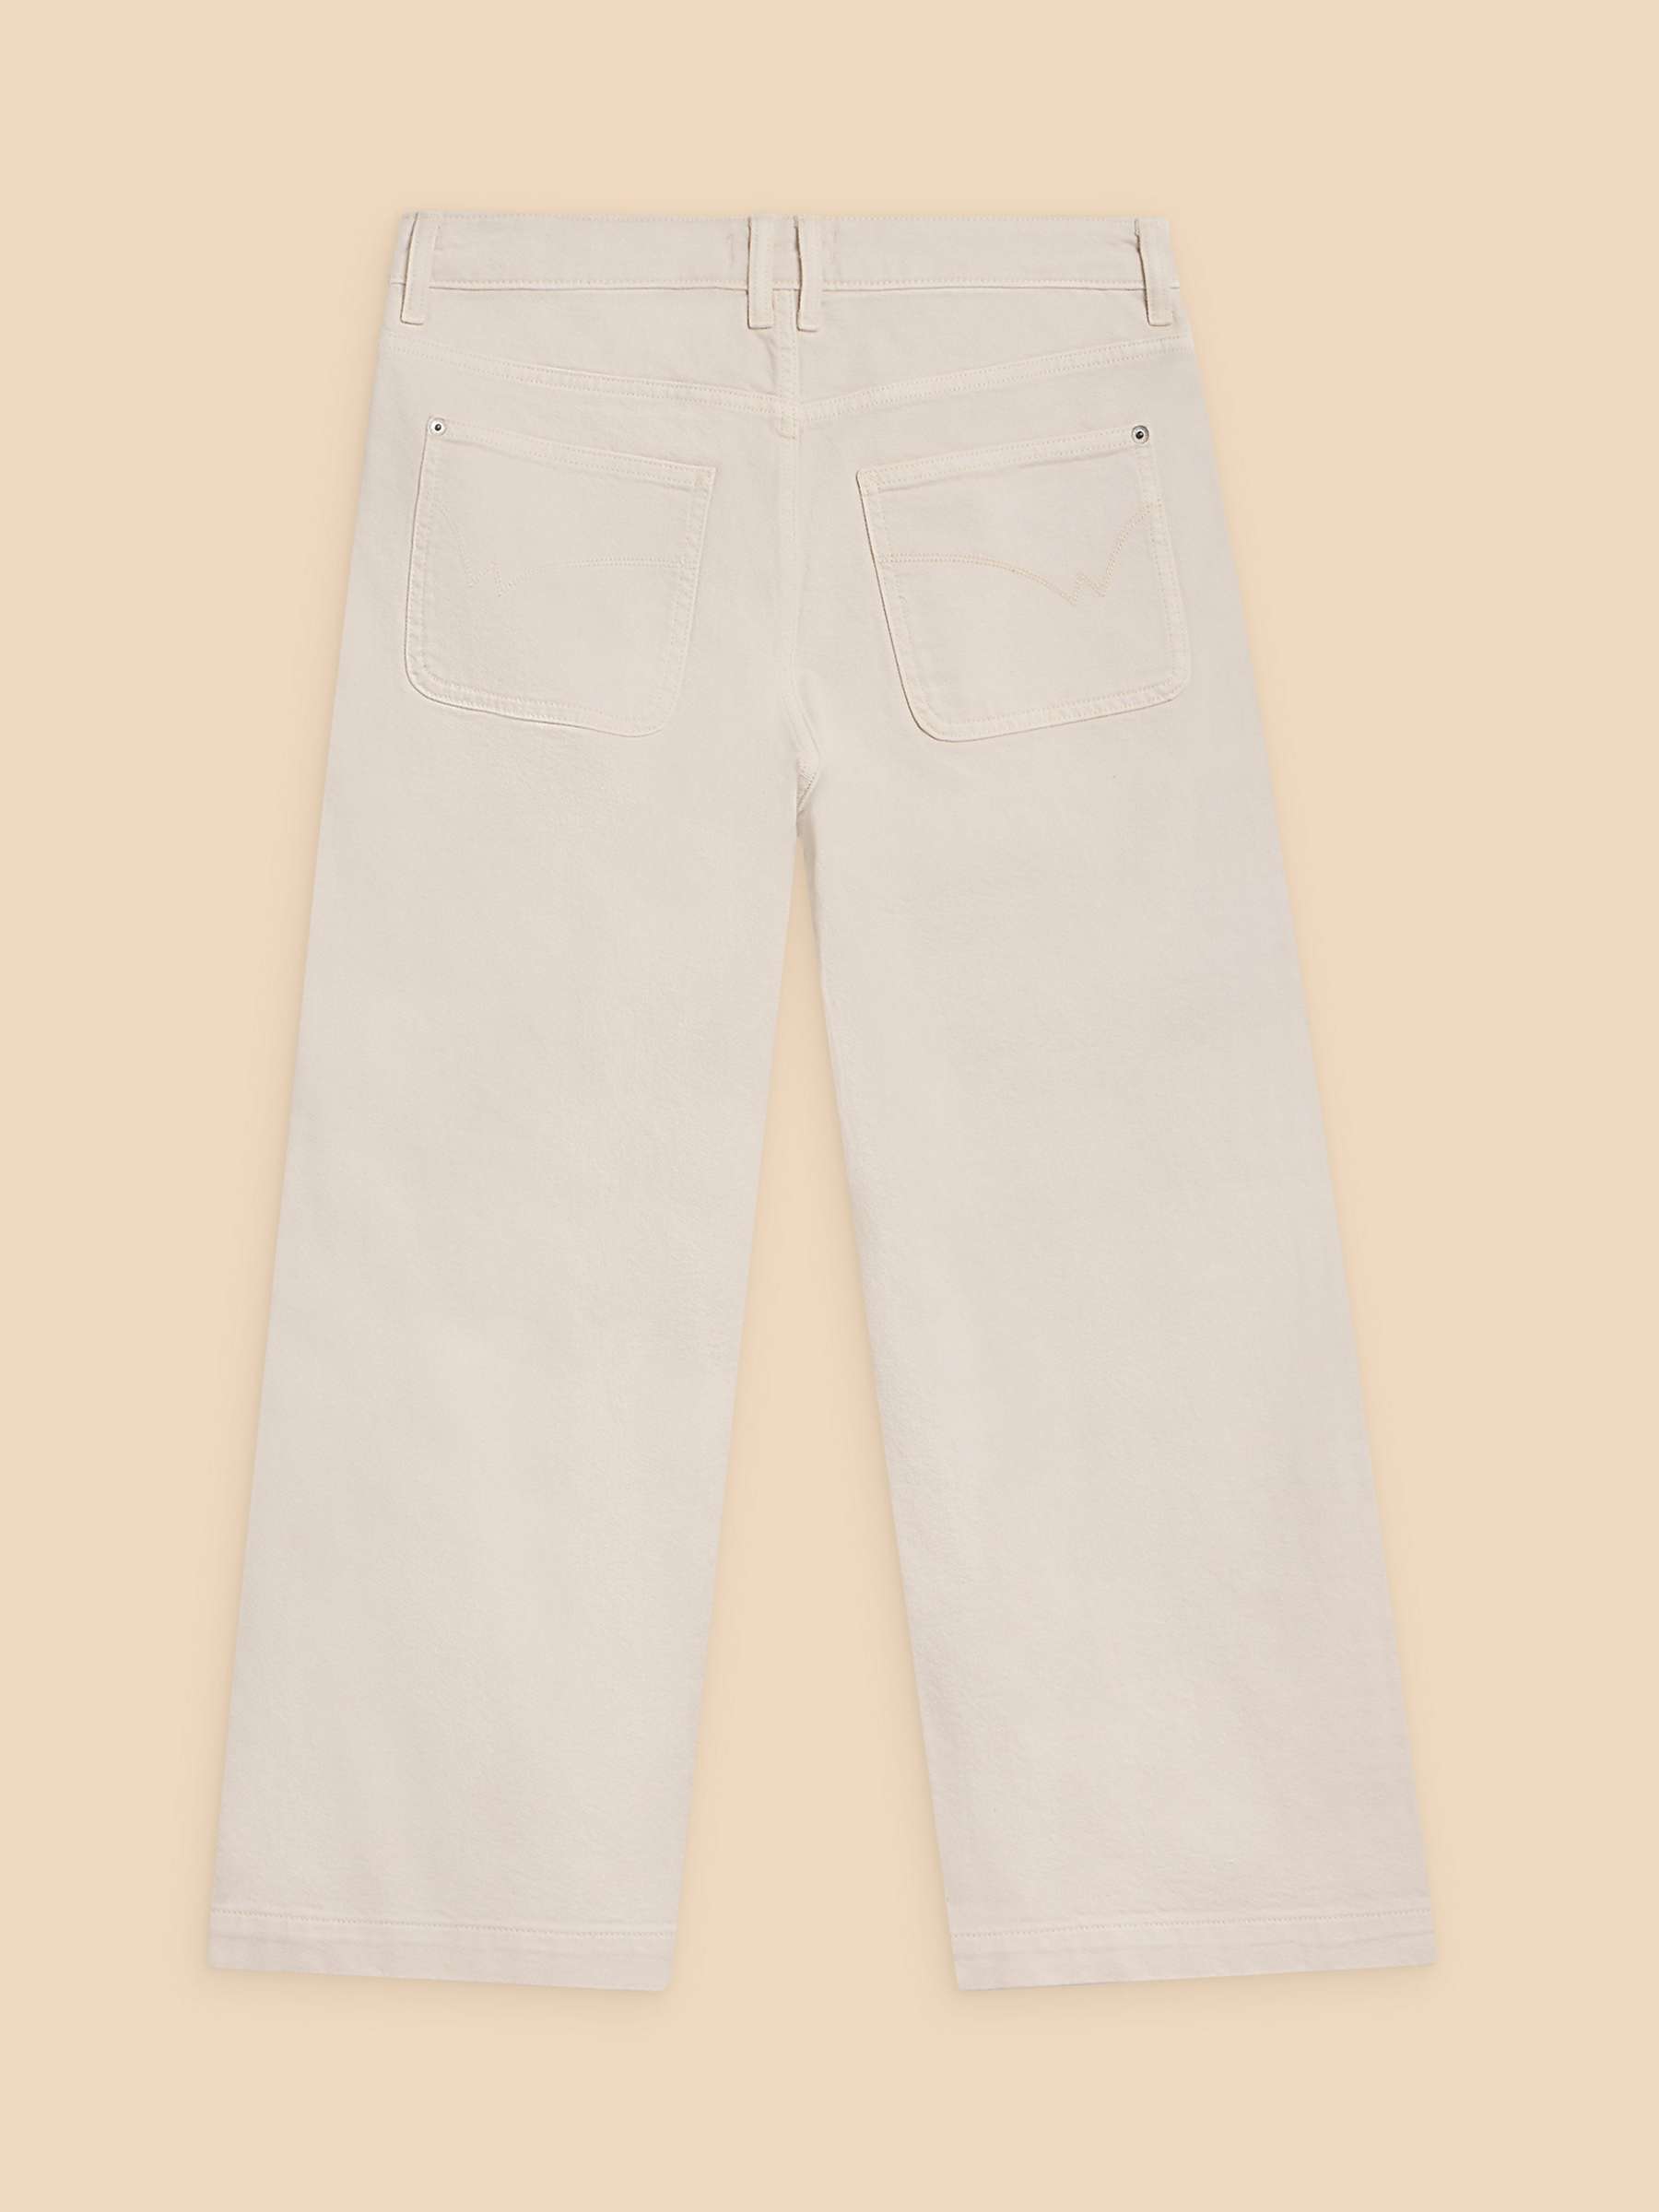 Buy White Stuff Tia Wide Leg Cropped Jeans Online at johnlewis.com